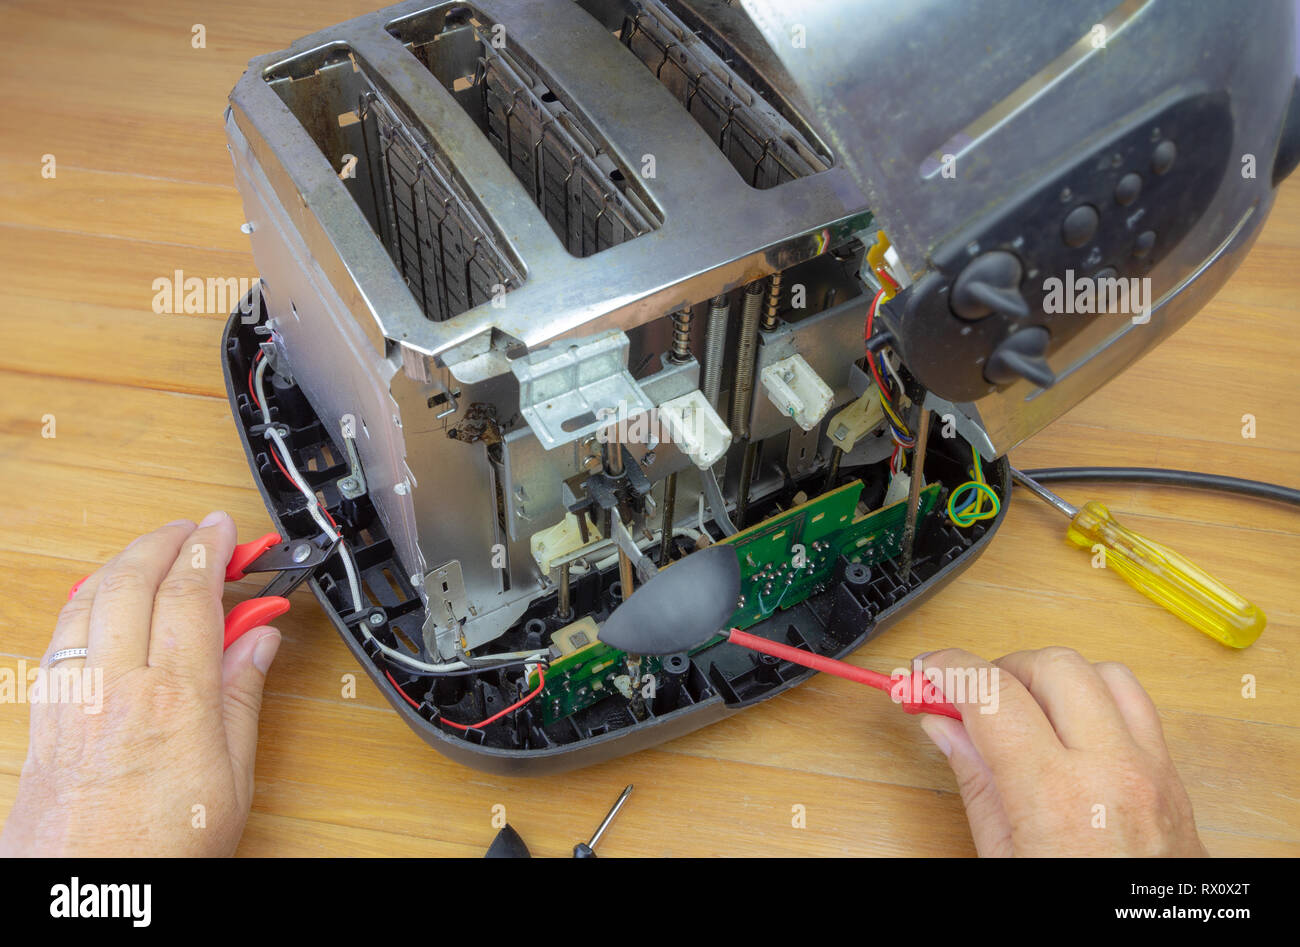 Concept Right to Repair, image showing hands of consumer repairing toaster with tools. Reduce waste by repairing household appliances. Stock Photo